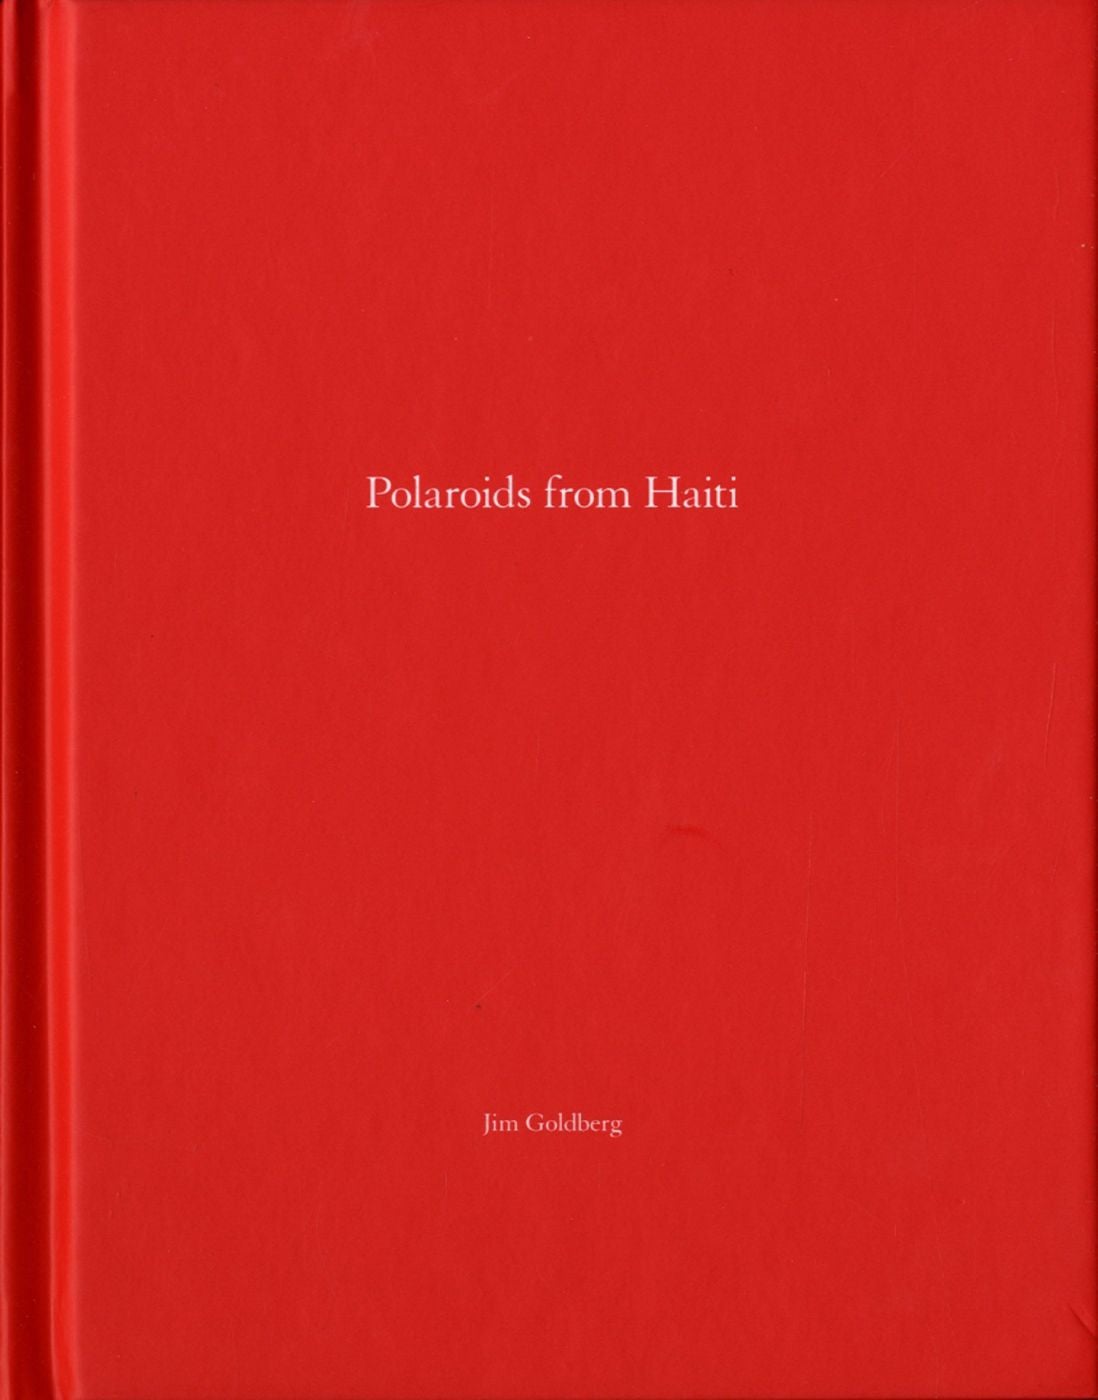 Jim Goldberg: Polaroids from Haiti (One Picture Book #84), Limited Edition (with Polaroid Print)